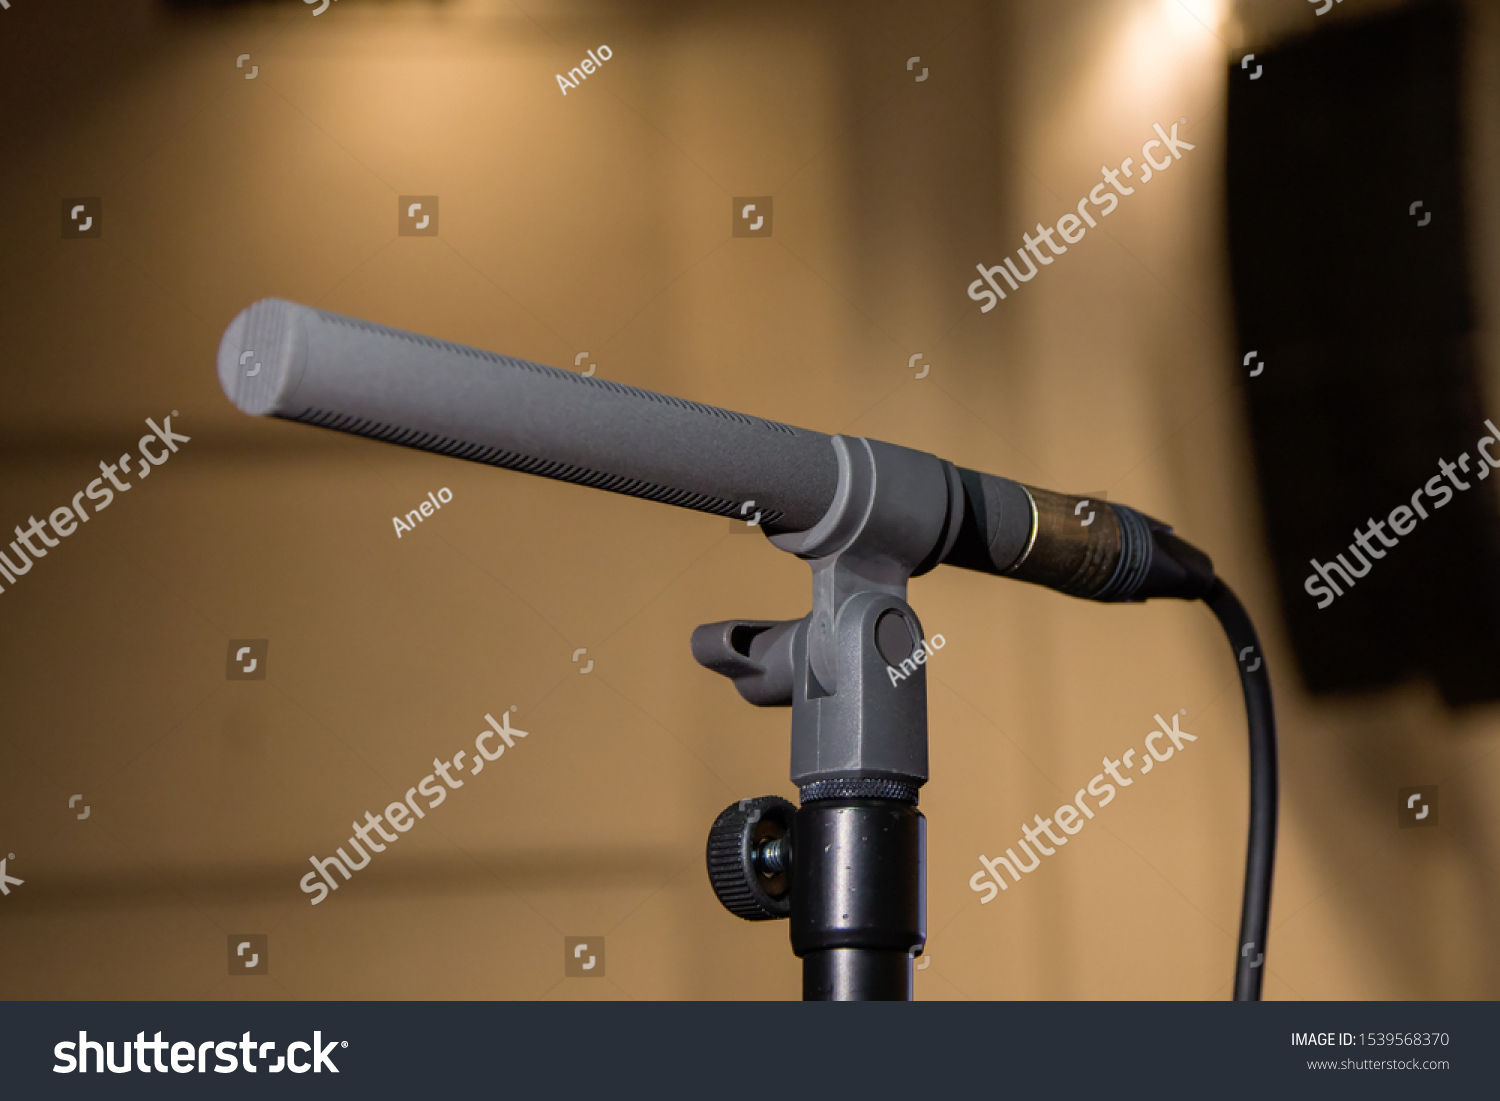 Microphone on the microphone stand in the auditorium, sound events in the audience, the background noise of the audience. #1539568370